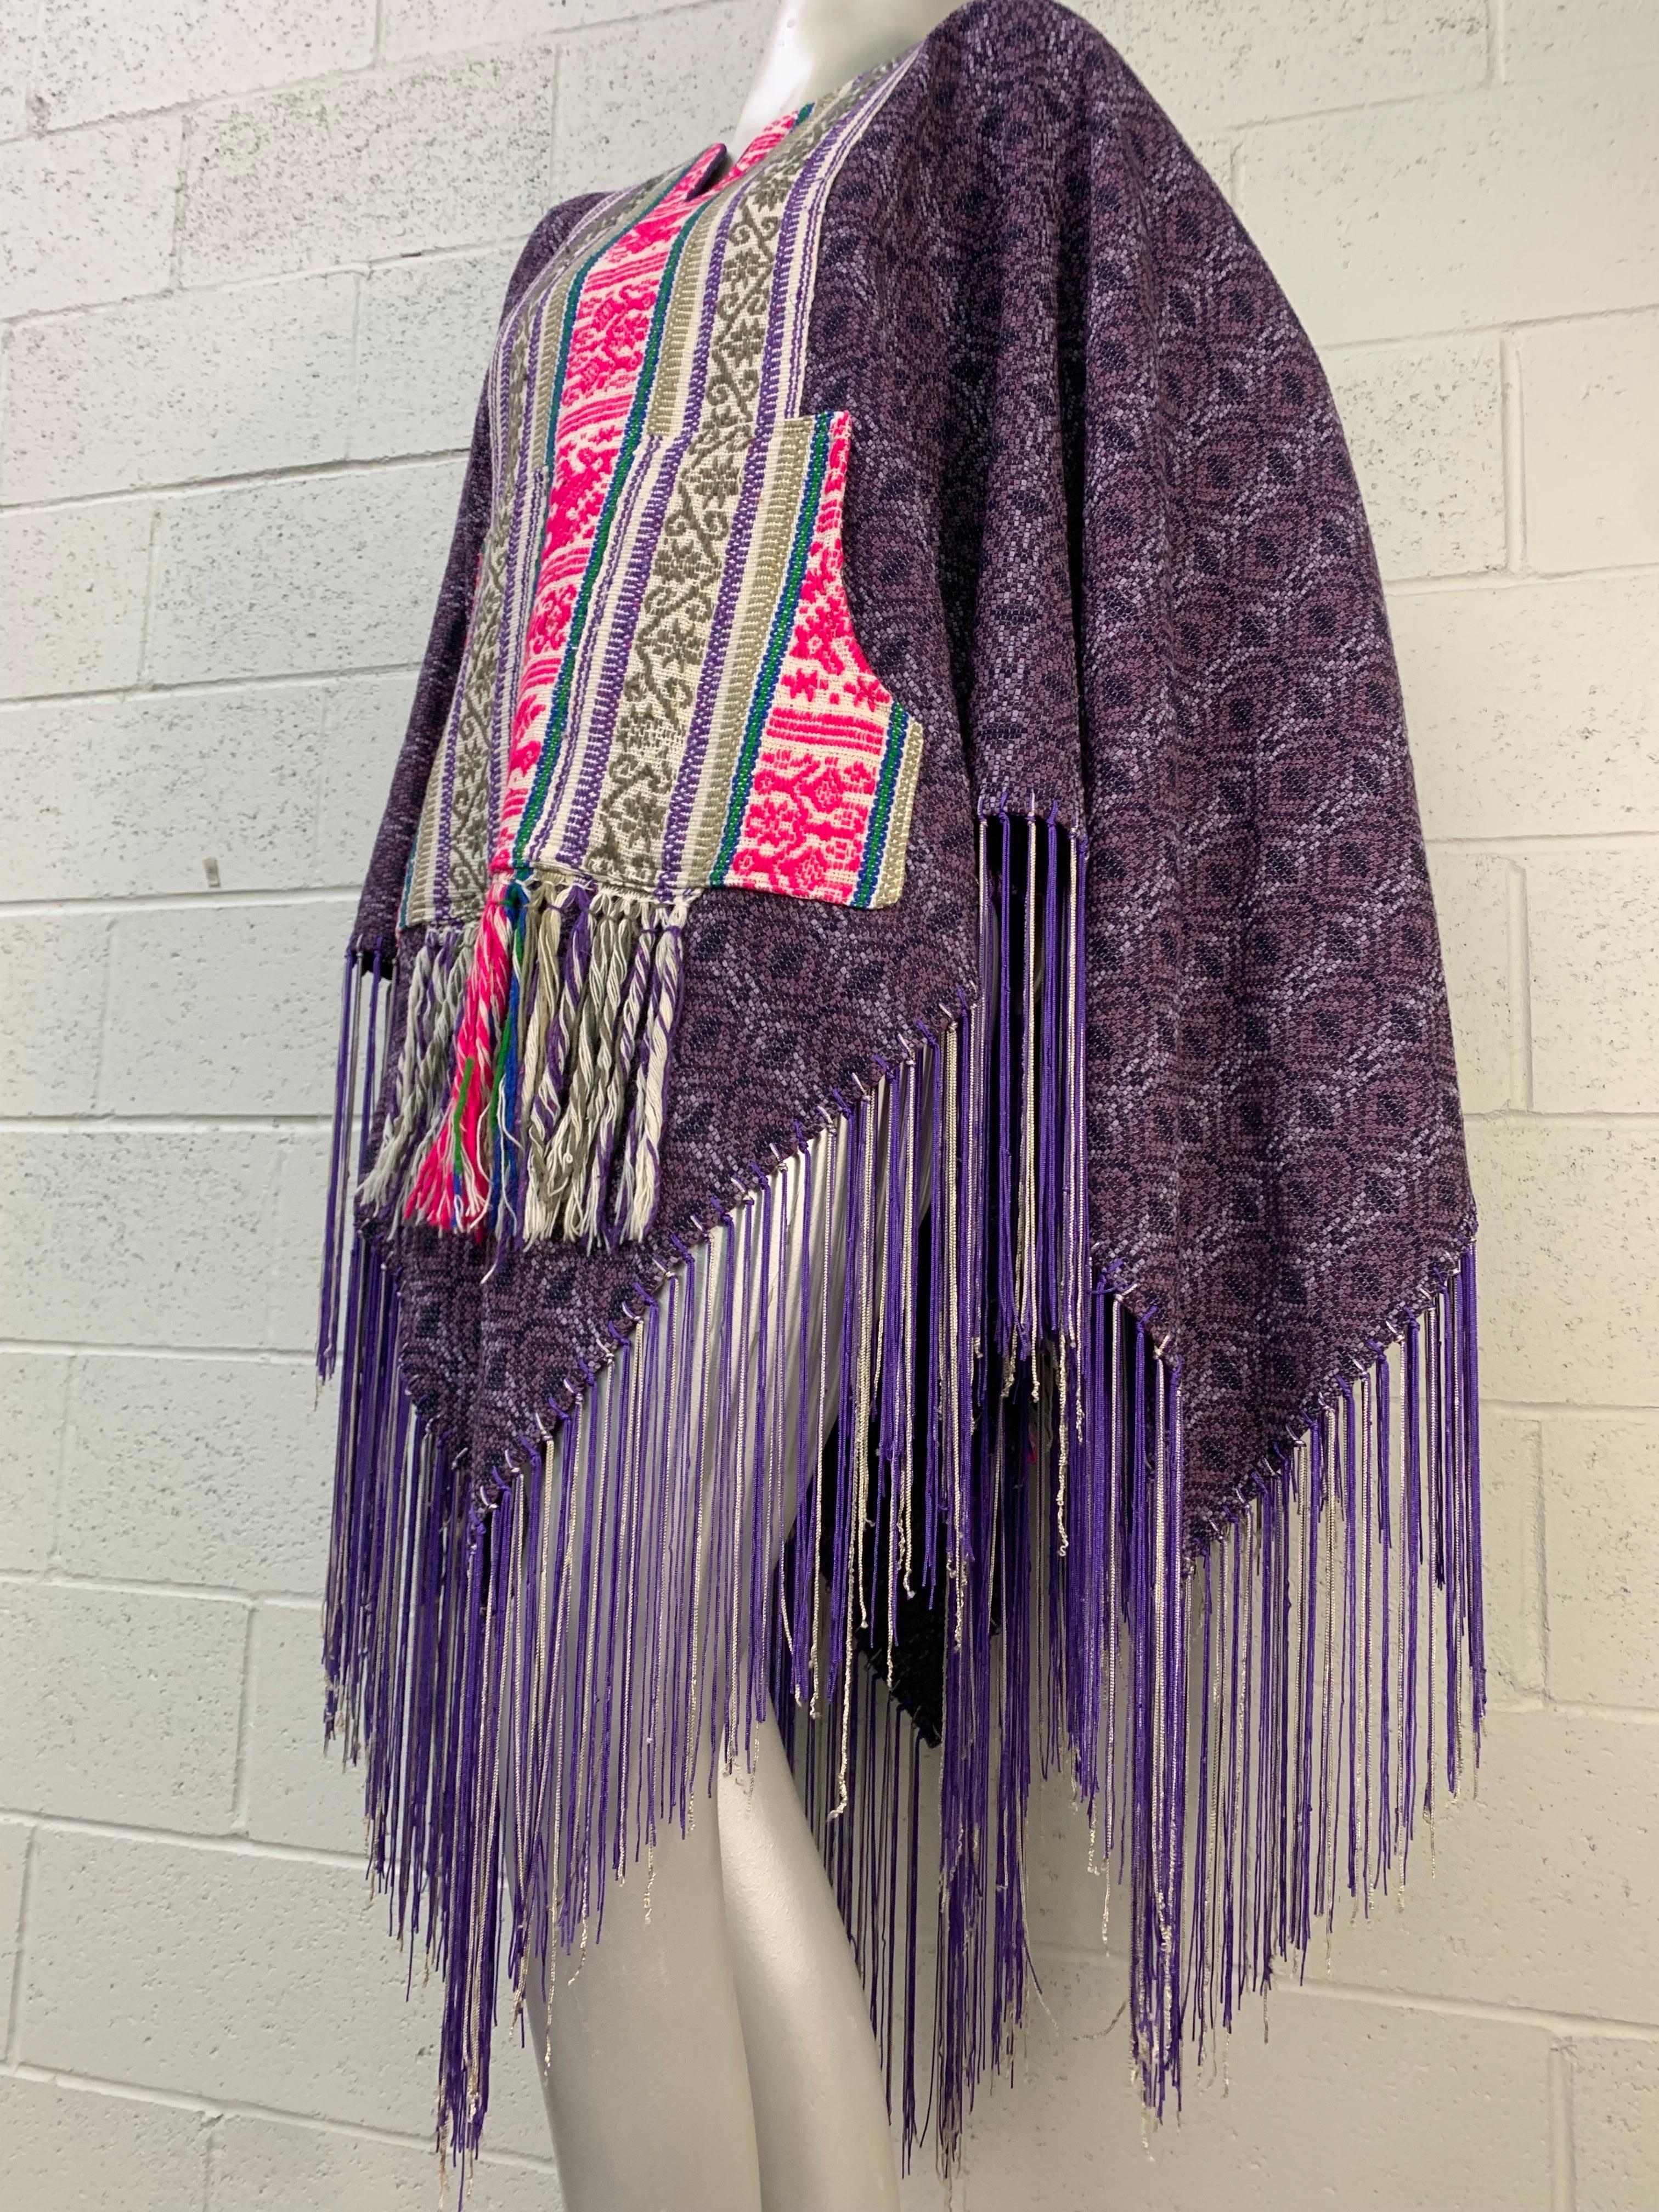 Torso Creations Wool & Silk Woven Poncho in Purple Pink & Gray w Fringed Hem:  The beauty of Central American-style woven patterns permiate this extravagant poncho. The added layer of contrasting vestment with center front pockets adds another handy